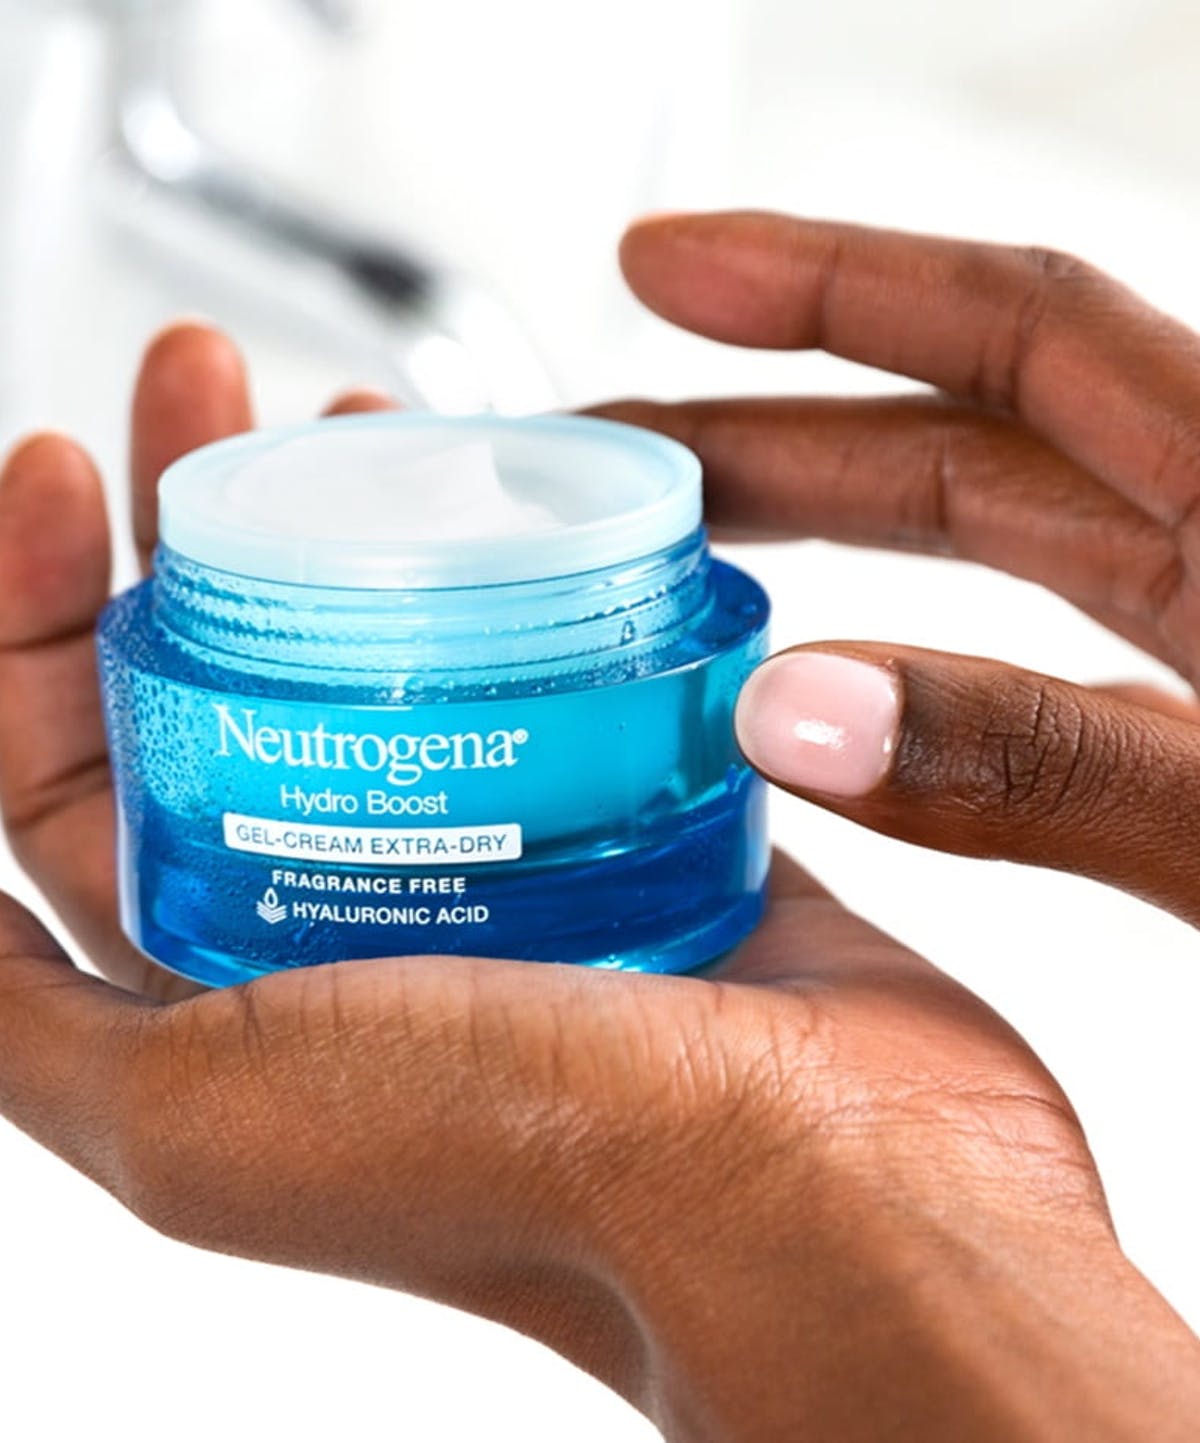 Neutrogena Hydro Boost Gel-Cream with Hyaluronic Acid for Extra-Dry Skin